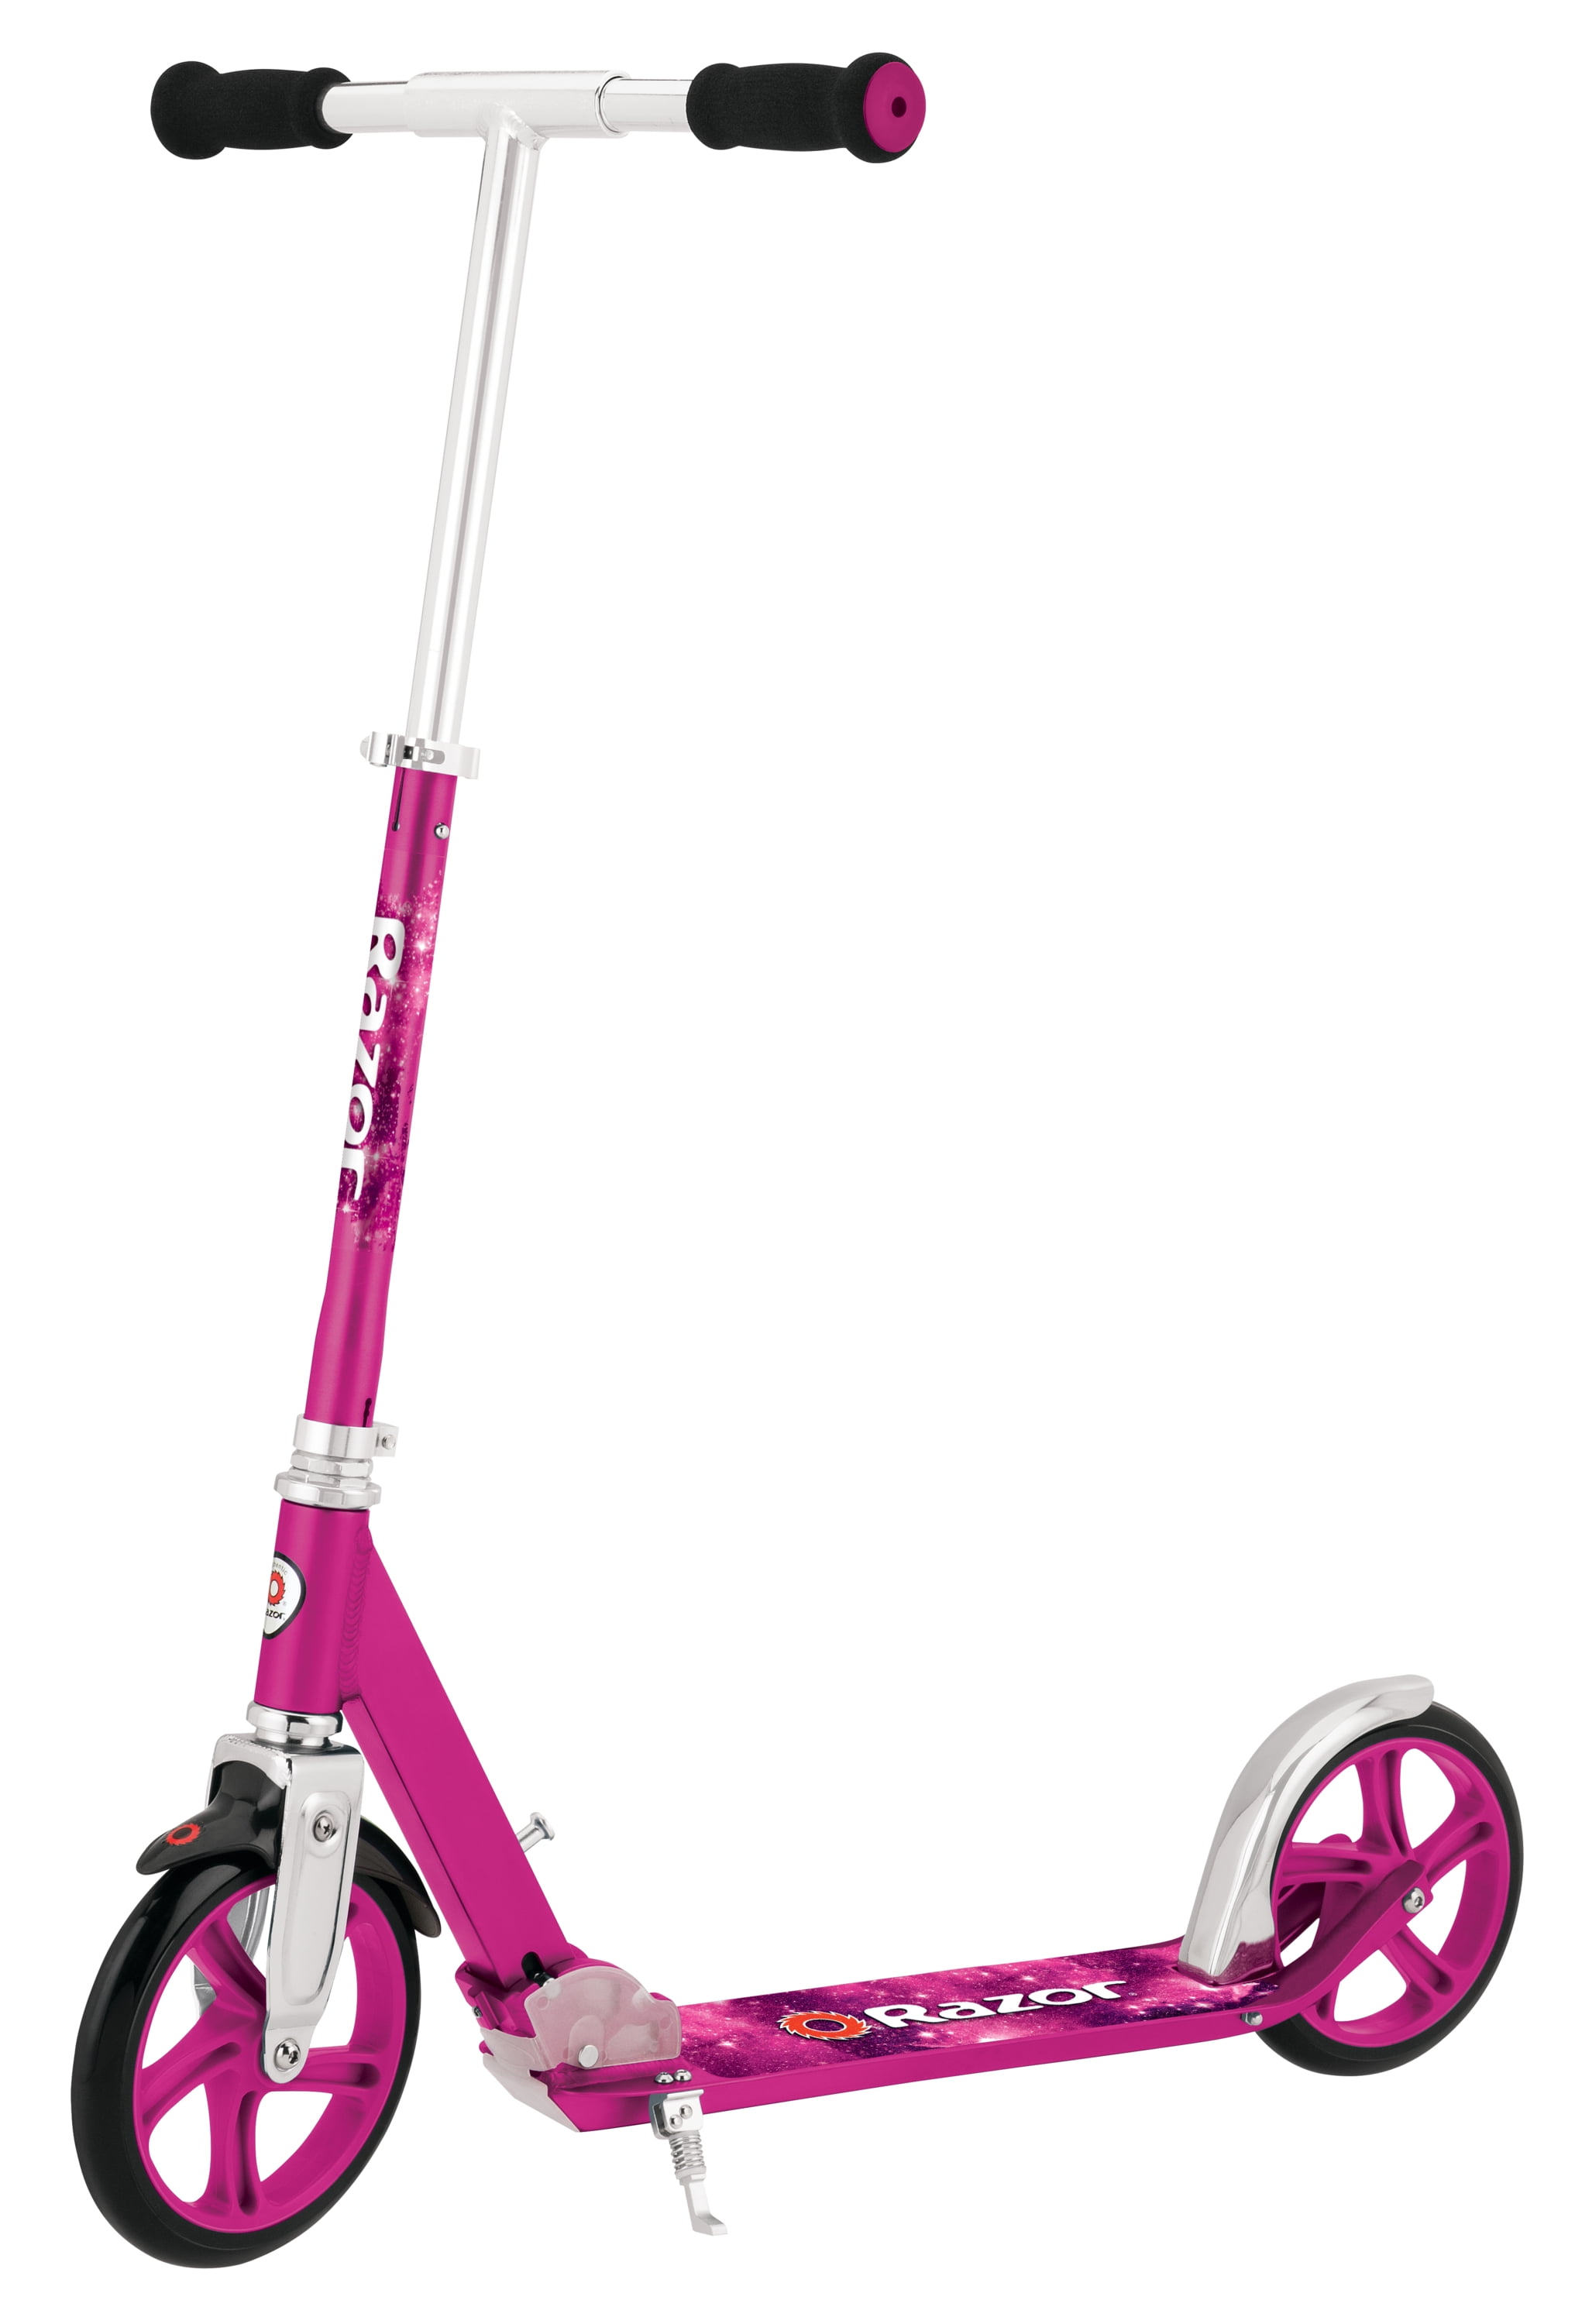 Razor A5 Lux Kick Scooter - Large 8" Pink, Adjustable Handlebars, Lightweight, for Riders up to 220 lbs - Walmart.com